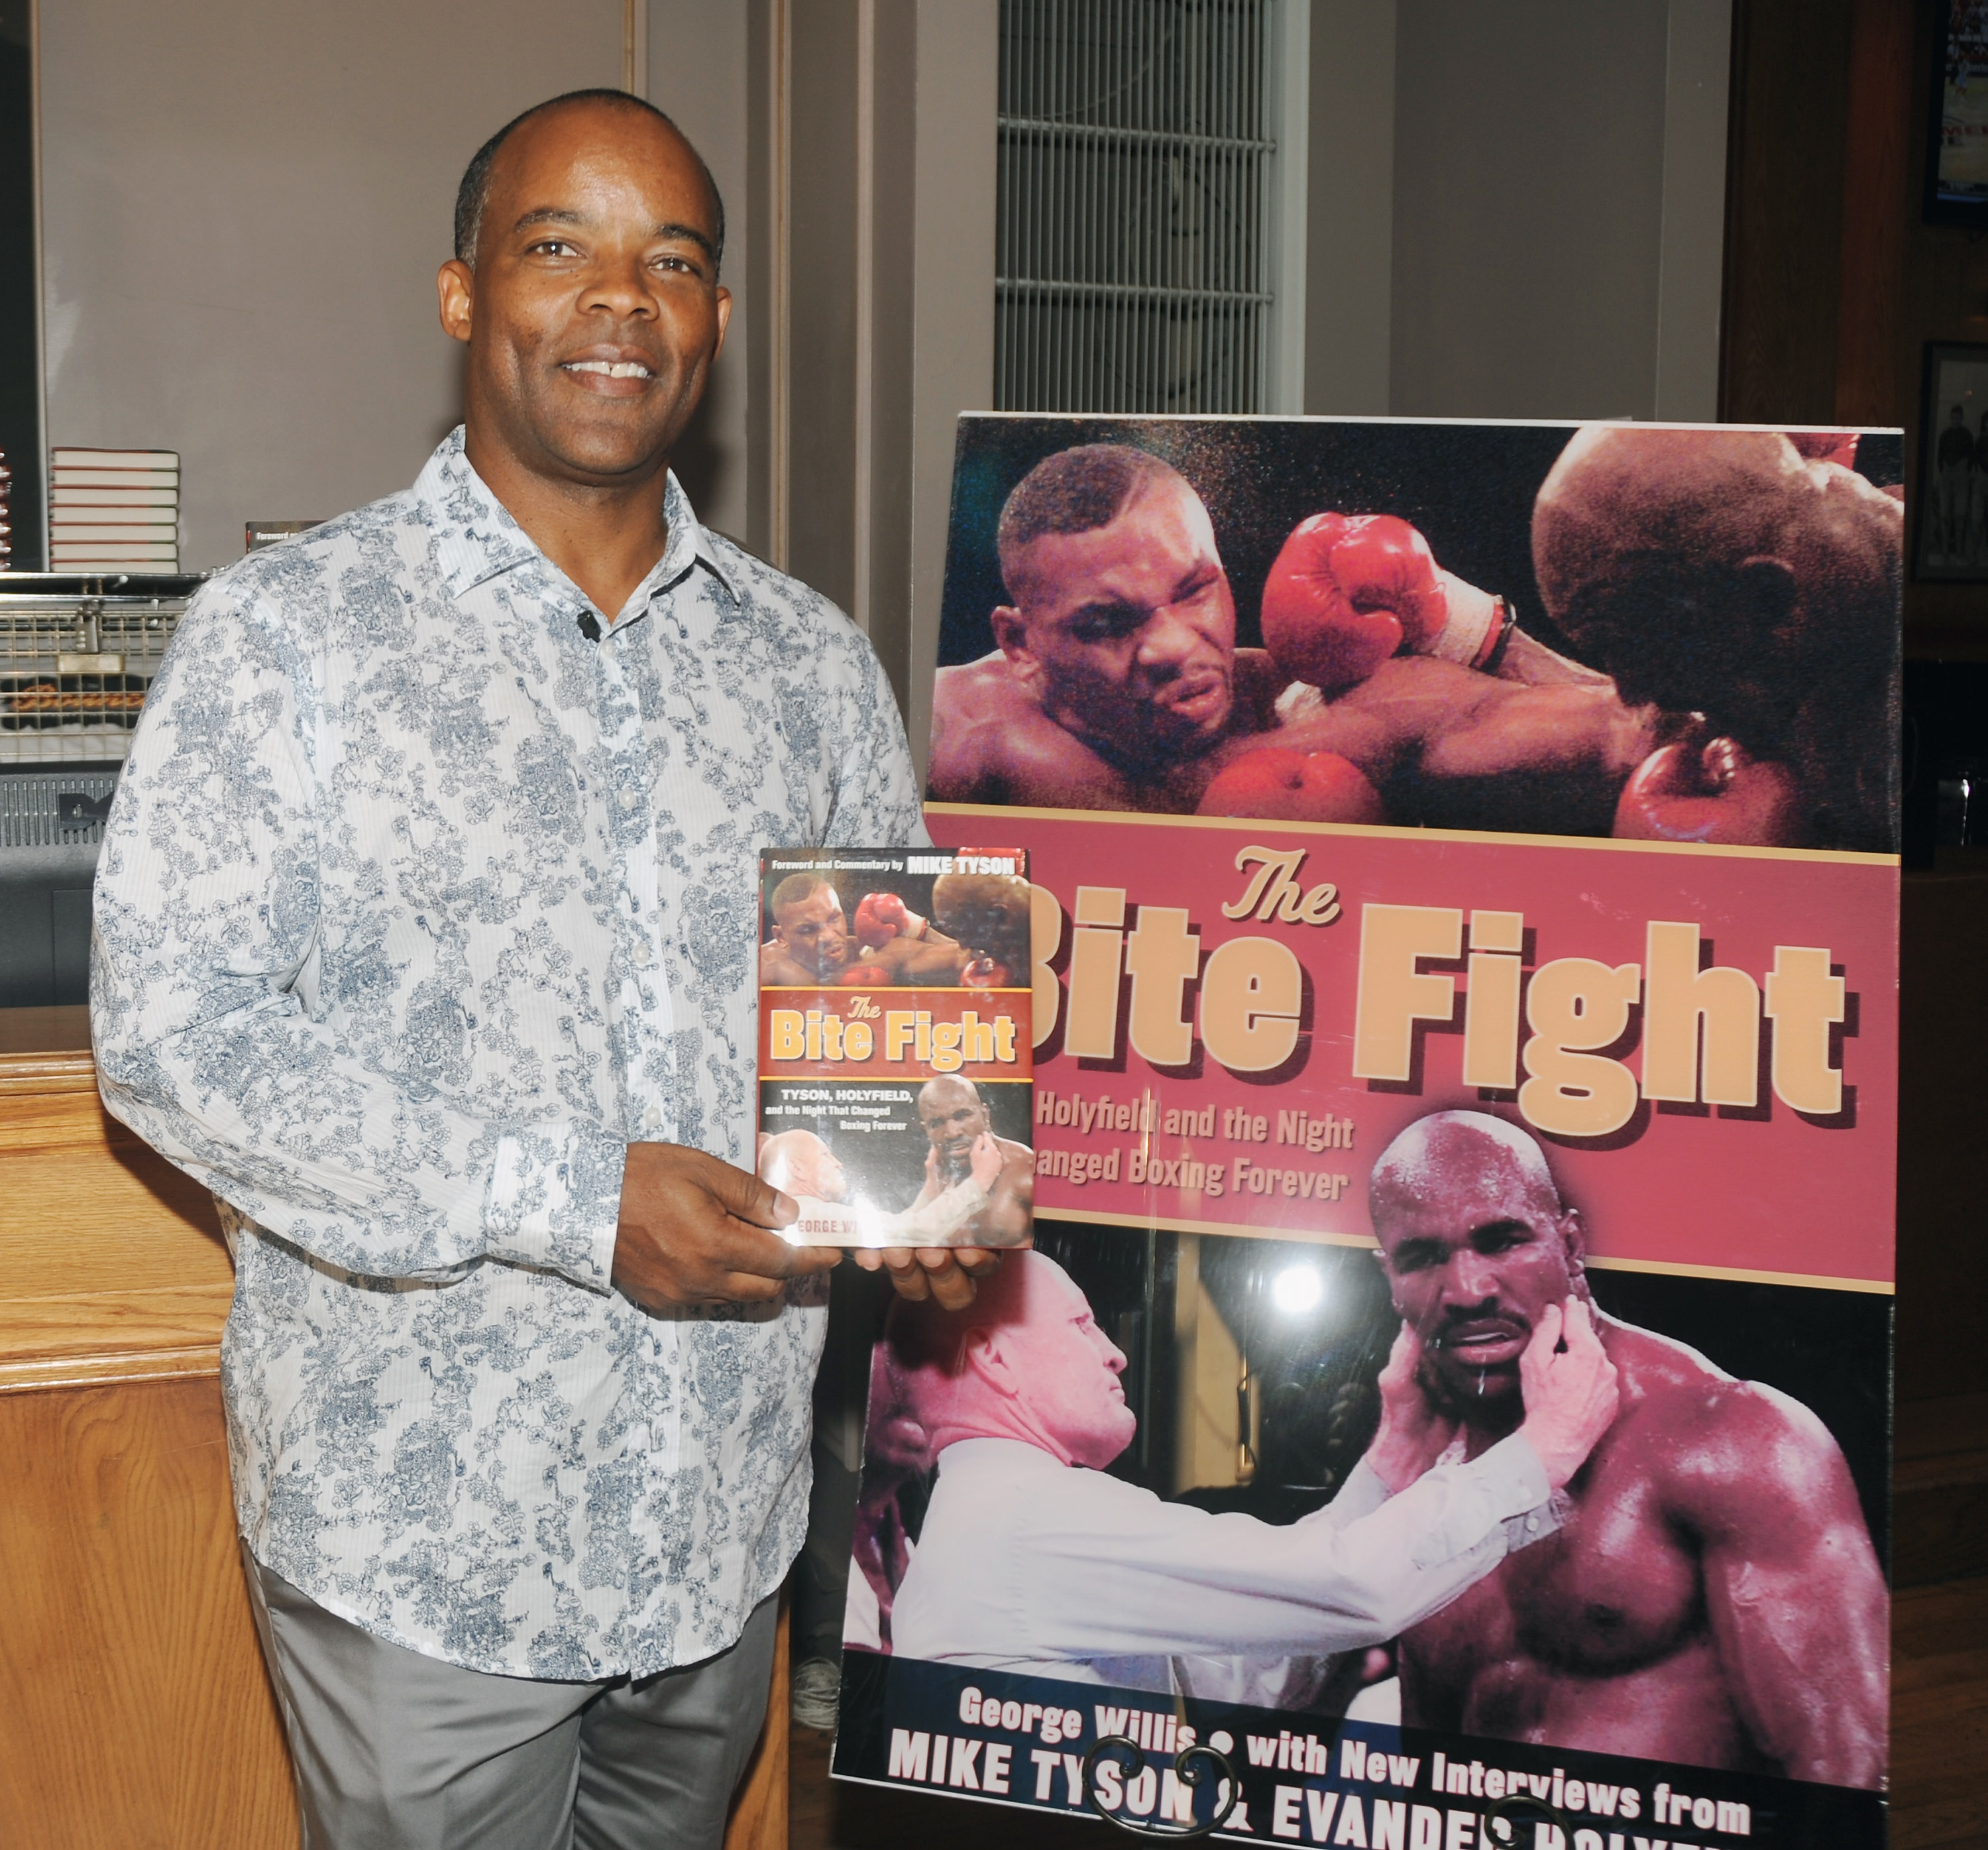 Book Launch Event For Author George Willis' "The Bite Fight"